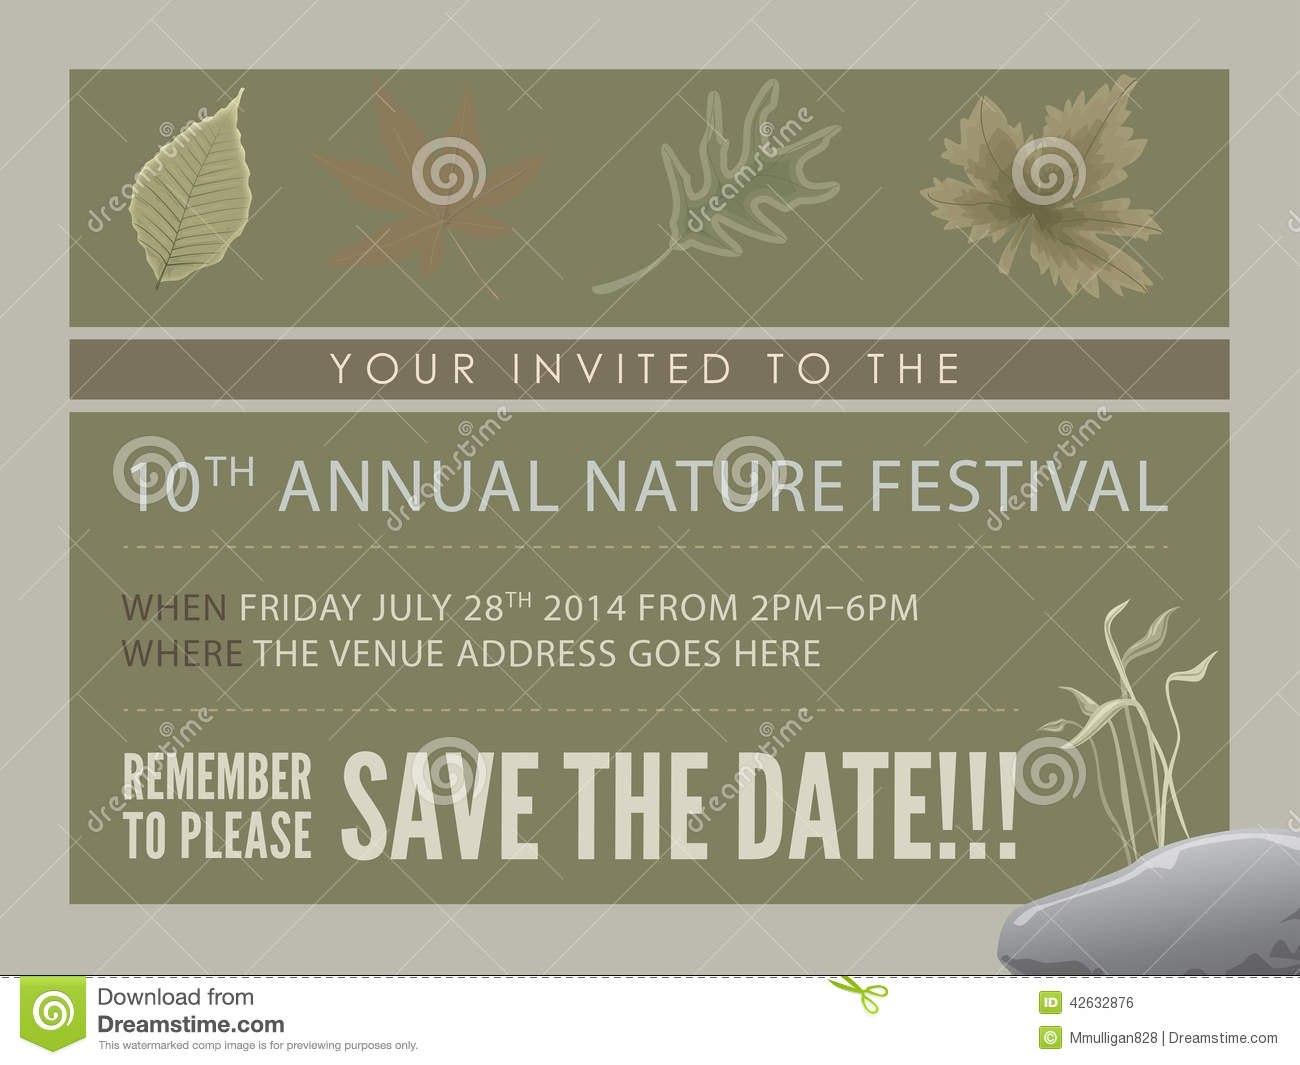 Template Event Flyer Or Save The Date Card Stock Illustration inside Save The Date Business Event Templates